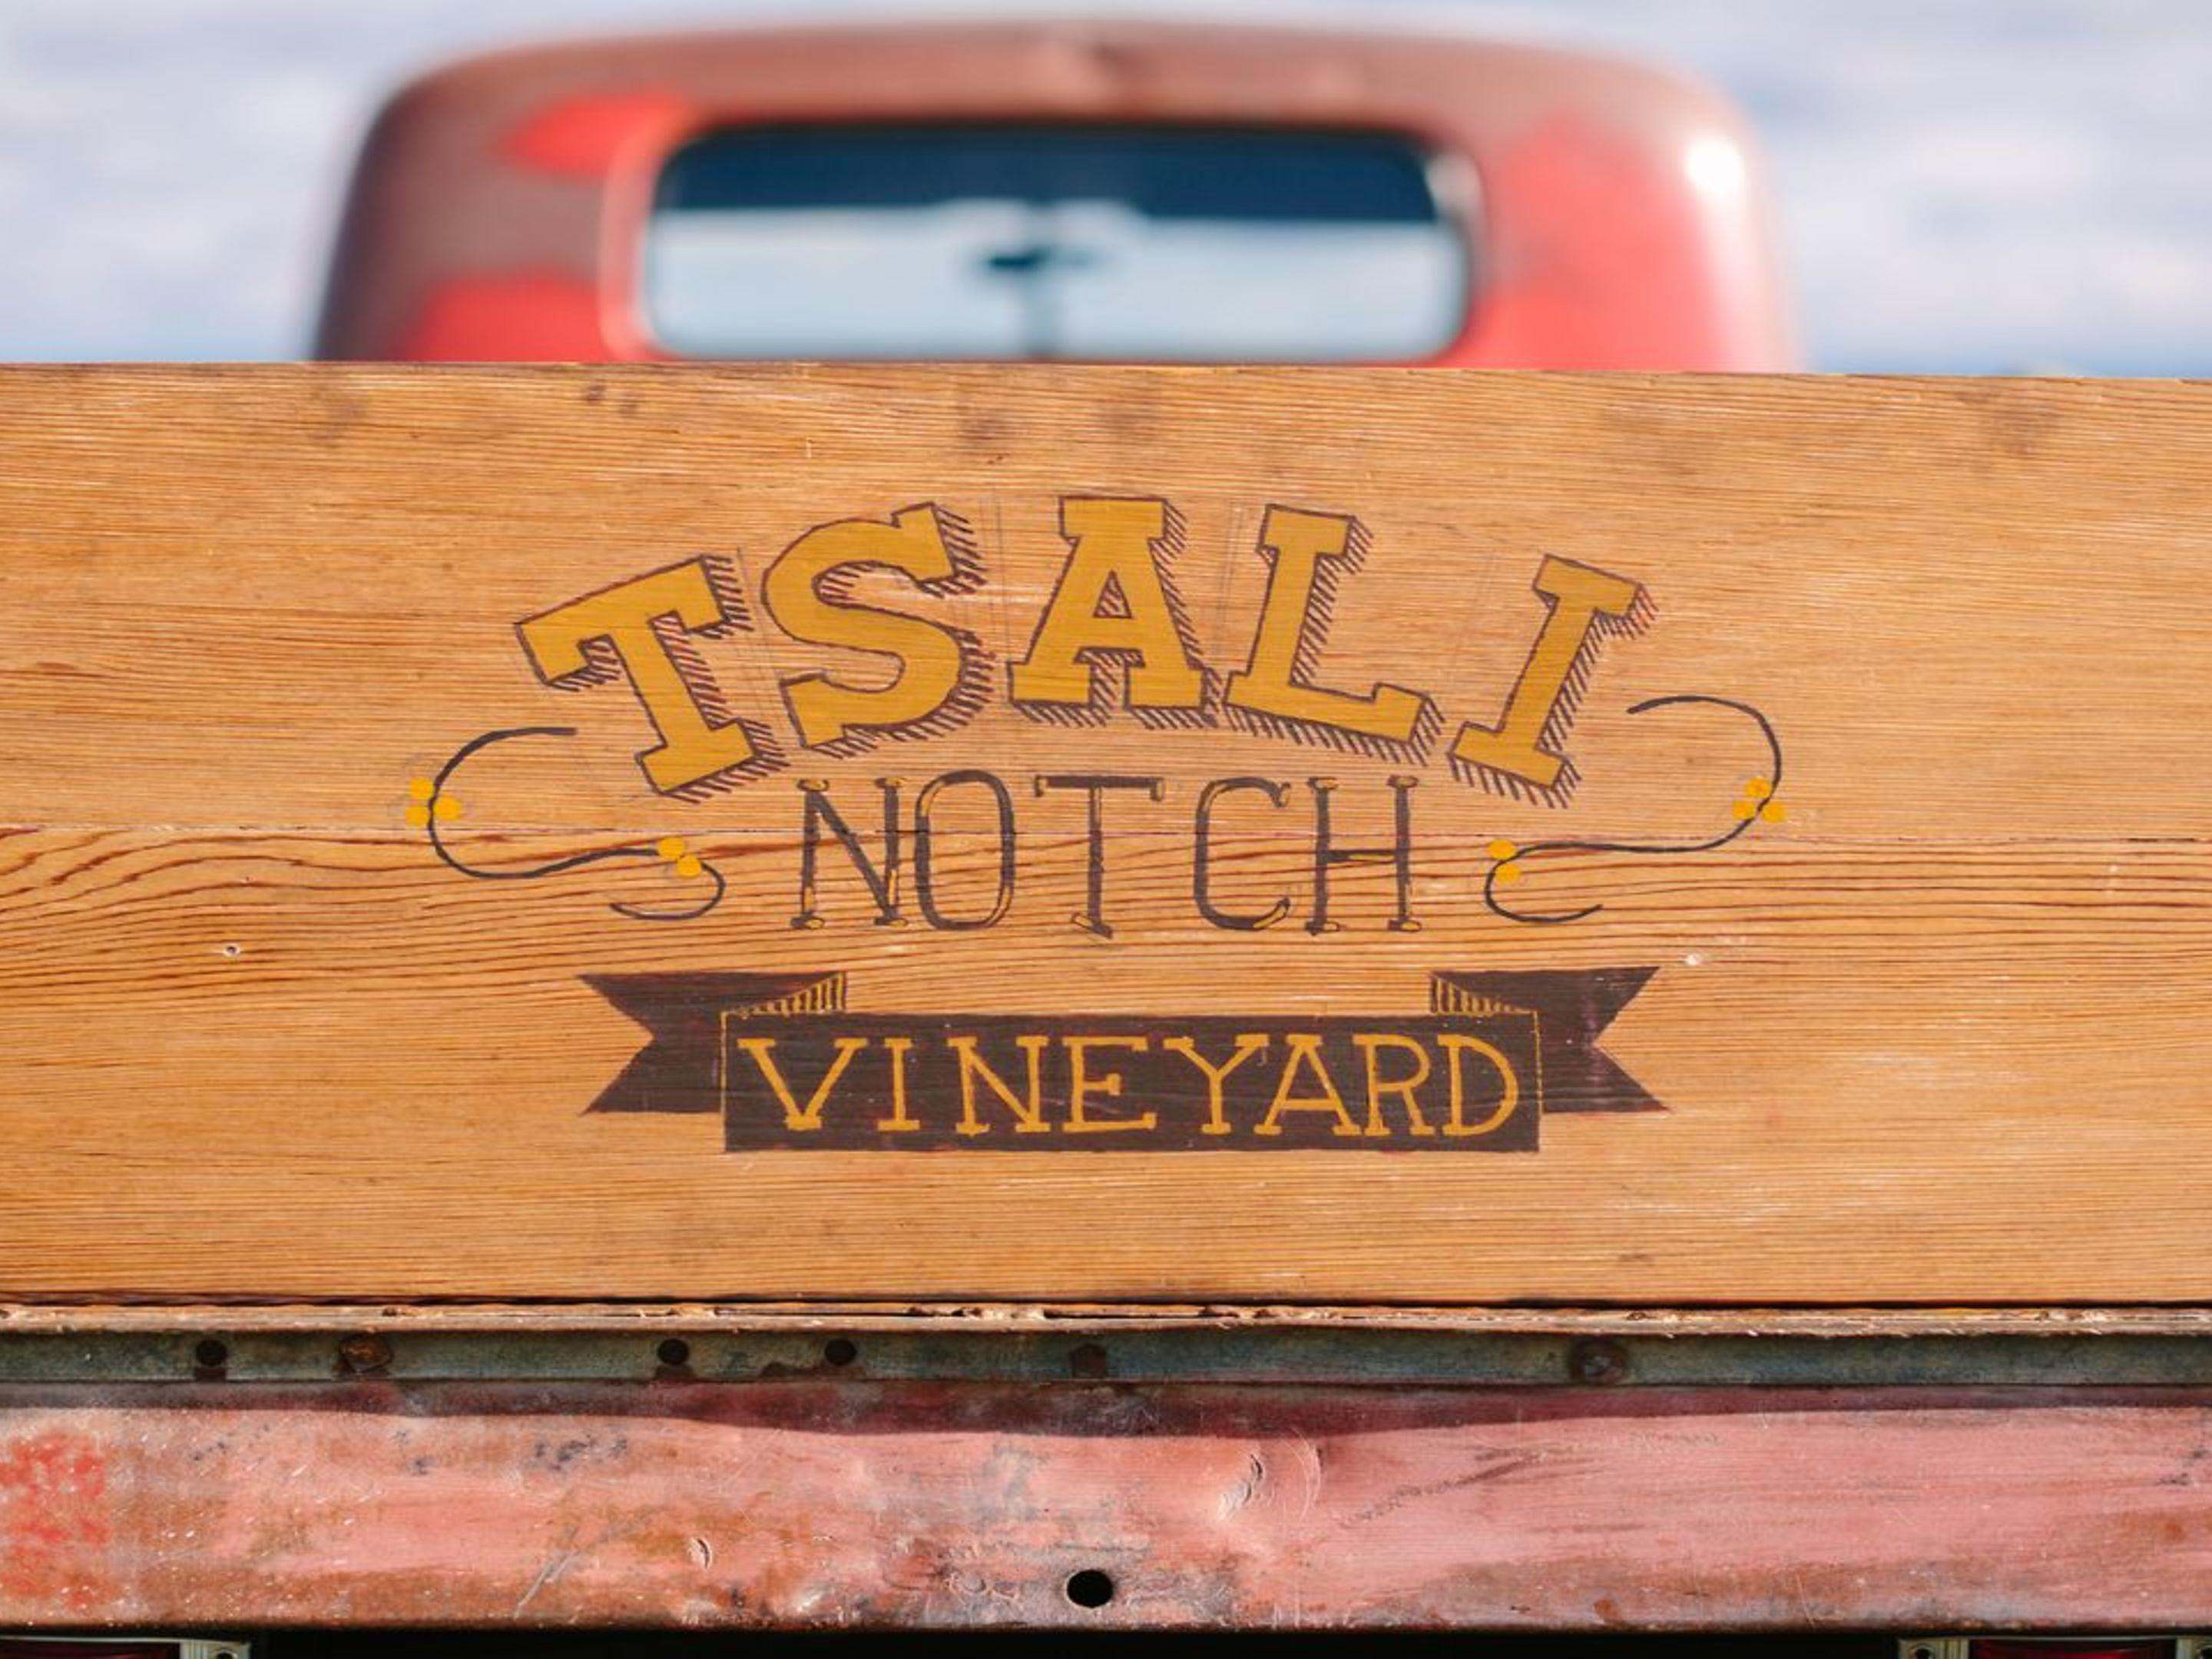 Tsali Notch Vineyards is just a short drive from the hotel.